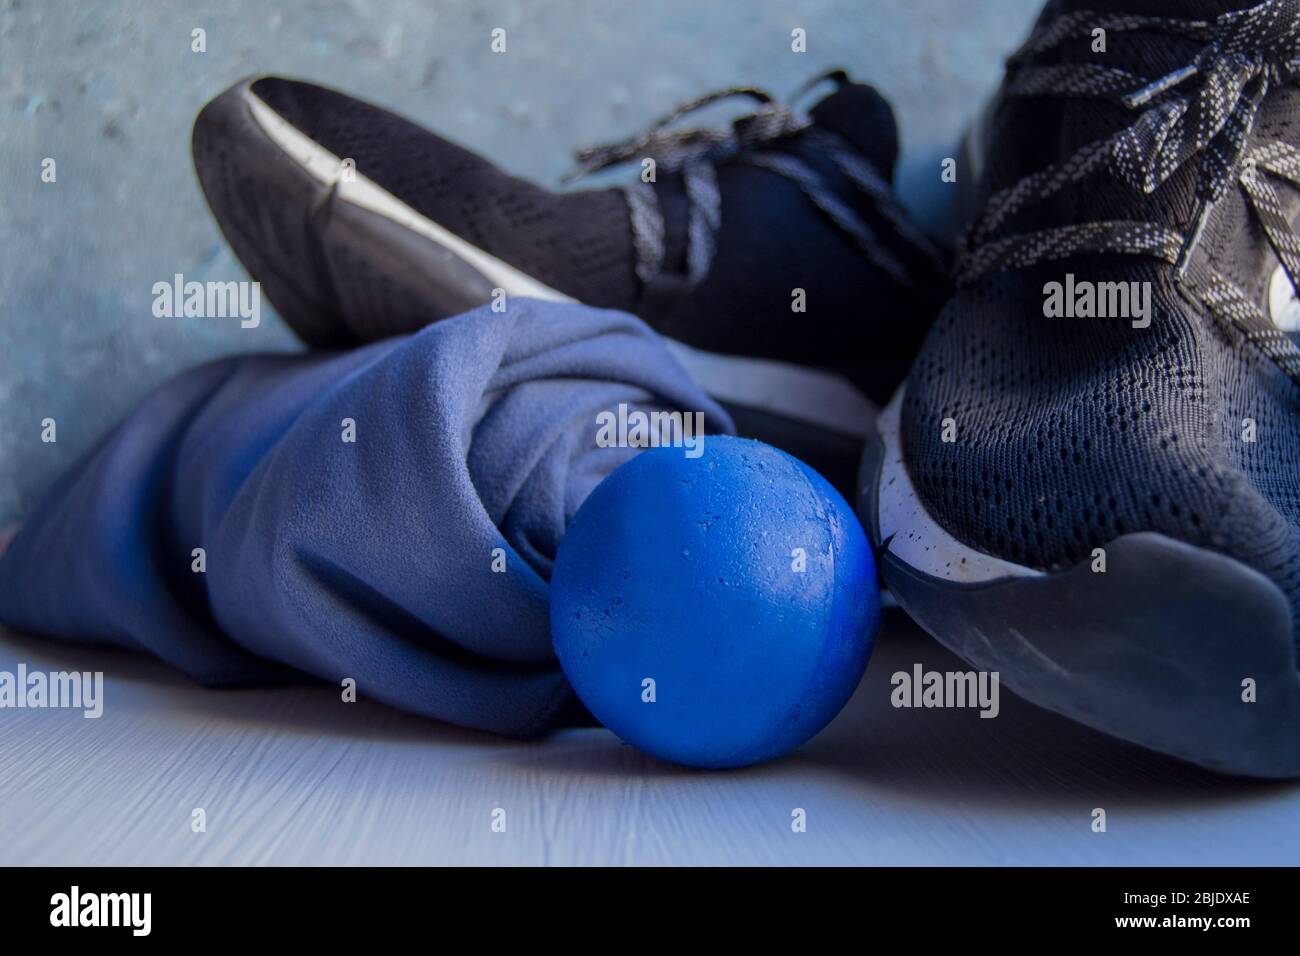 Black sneaker with white details and holes, a blue rolled towel and a blue foam rubber ball on a white base and a background in blue and gray tones. Stock Photo